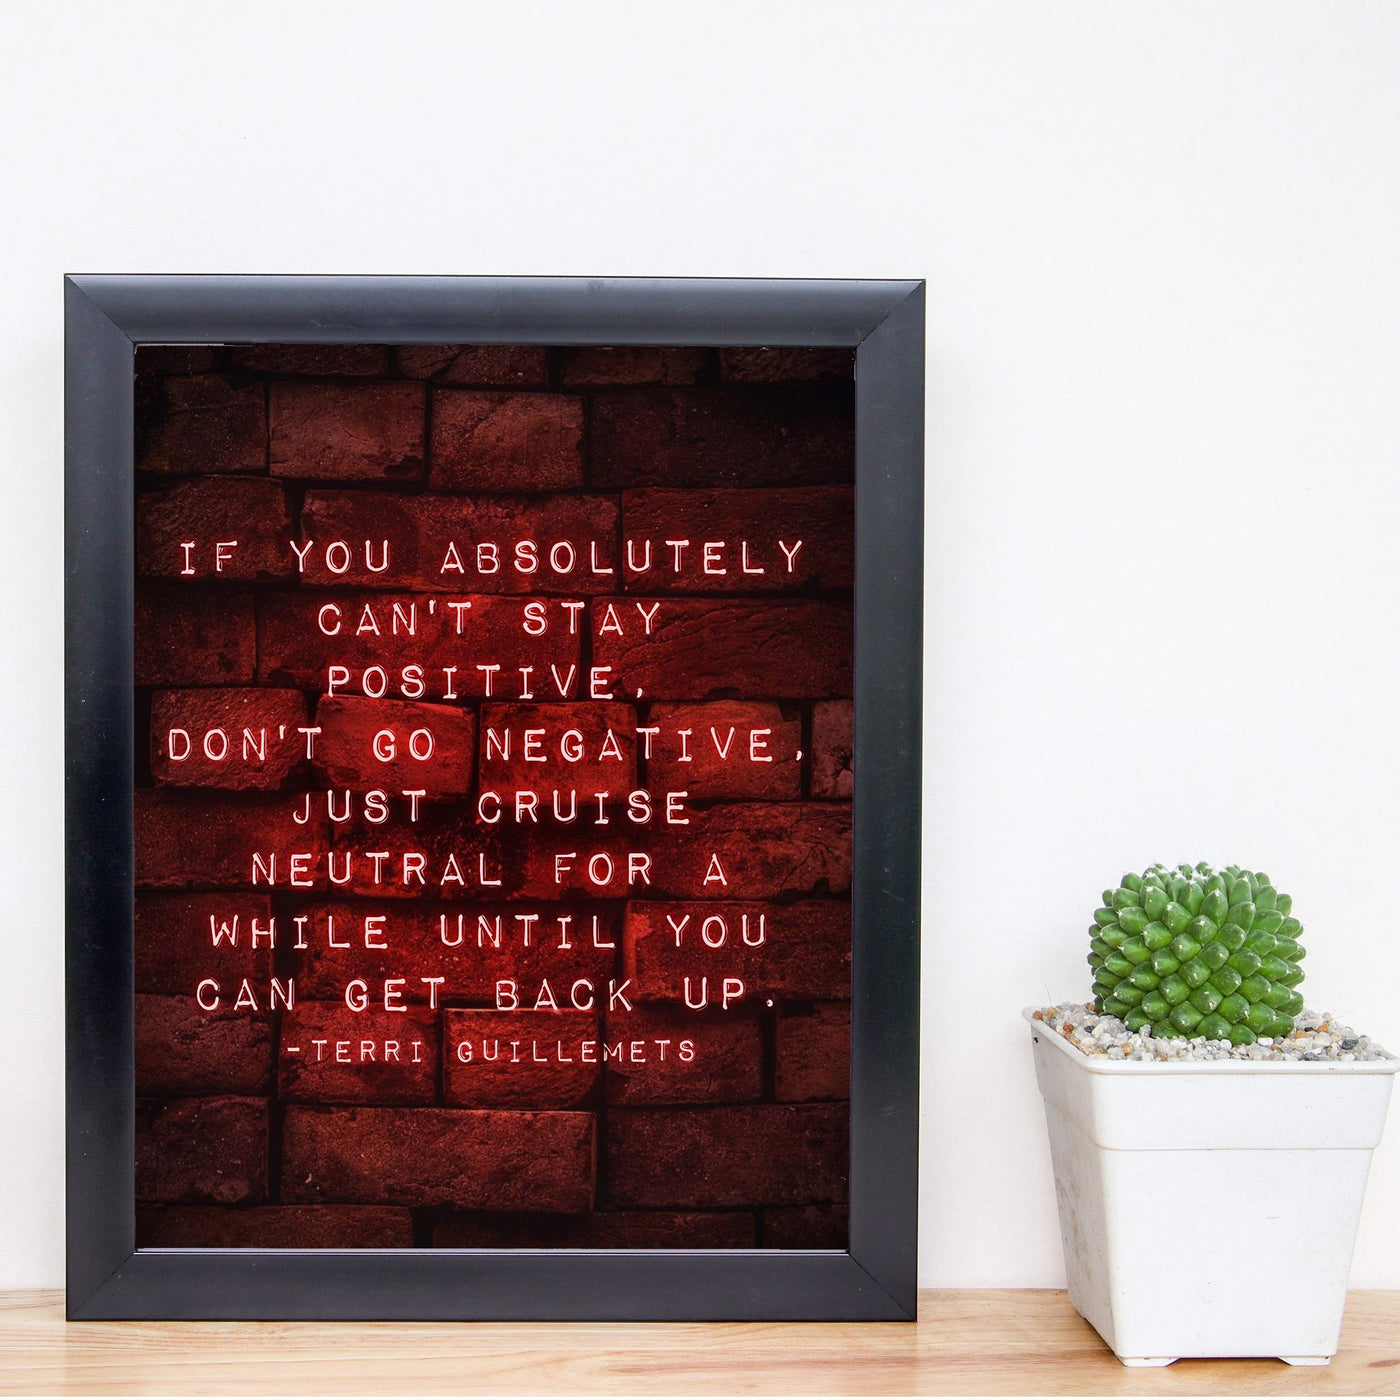 ?If You Can't Stay Positive-Don't Go Negative" Motivational Quotes Wall Art Sign -8x10" Typographic Poster Print w/Replica Brick Design-Ready to Frame. Inspirational Home-Office-School Decor.